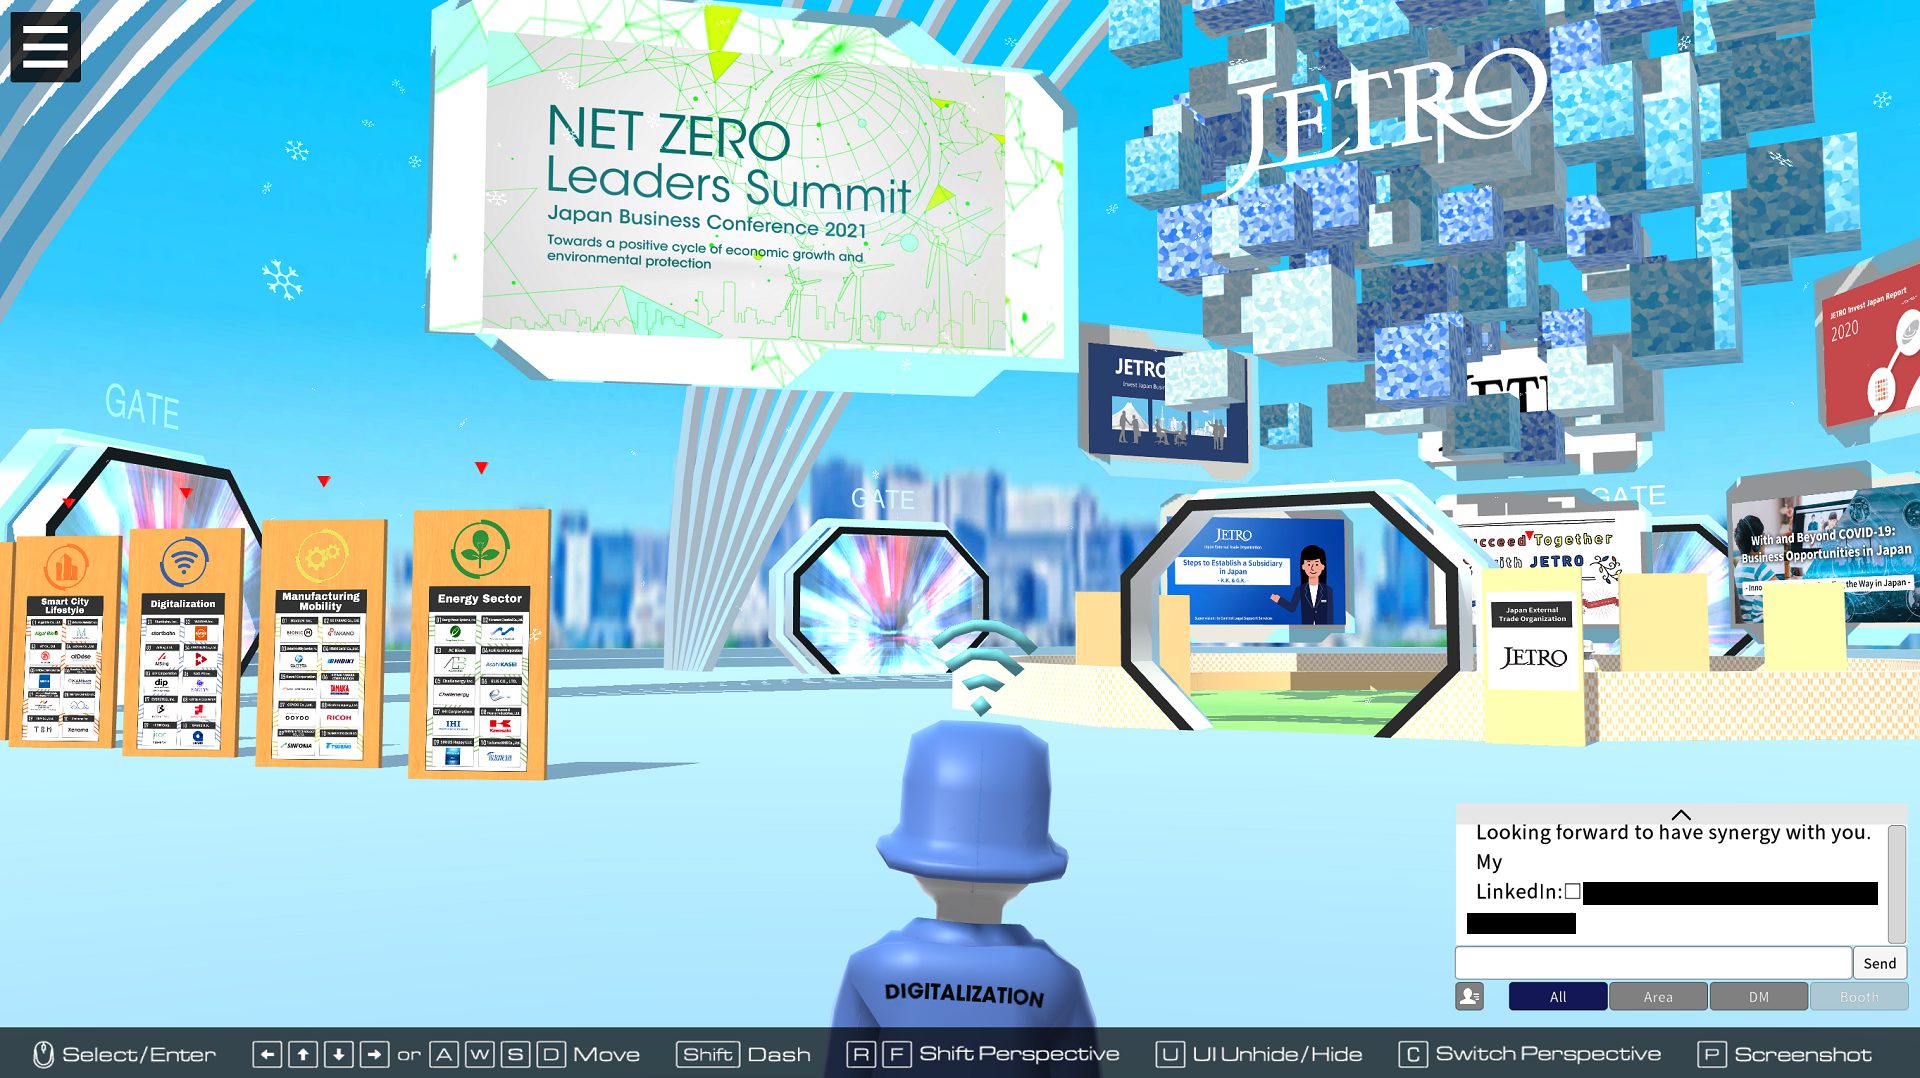 NET ZERO Leaders Summit ( Japan Business Conference 2021 ) 参加レポート